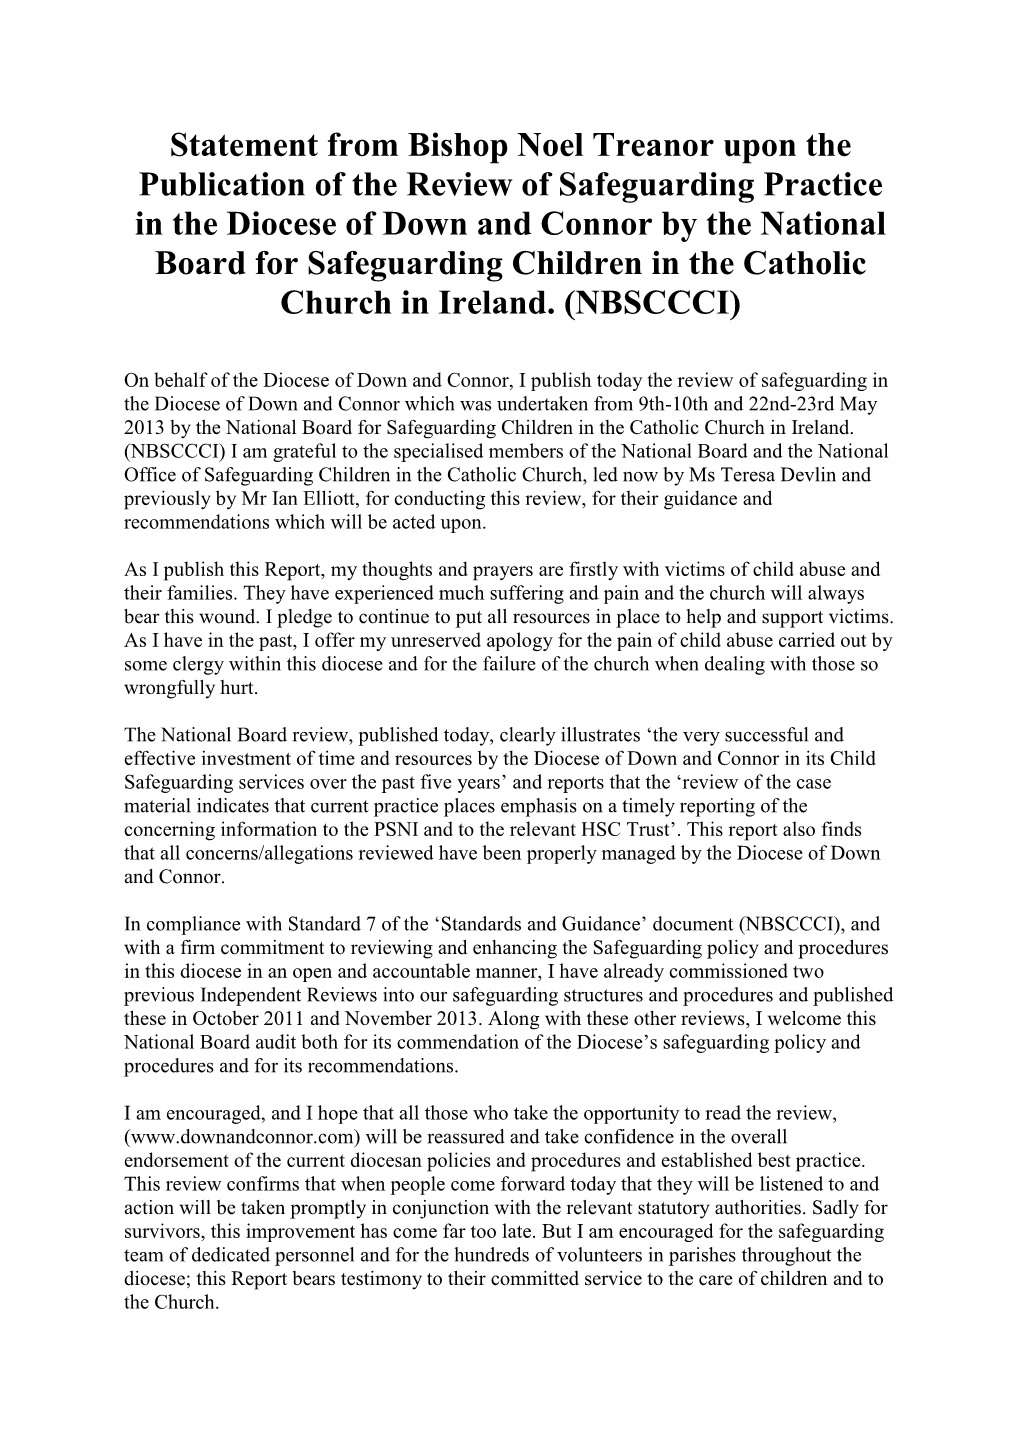 Statement from Bishop Noel Treanor Upon the Publication of the Review